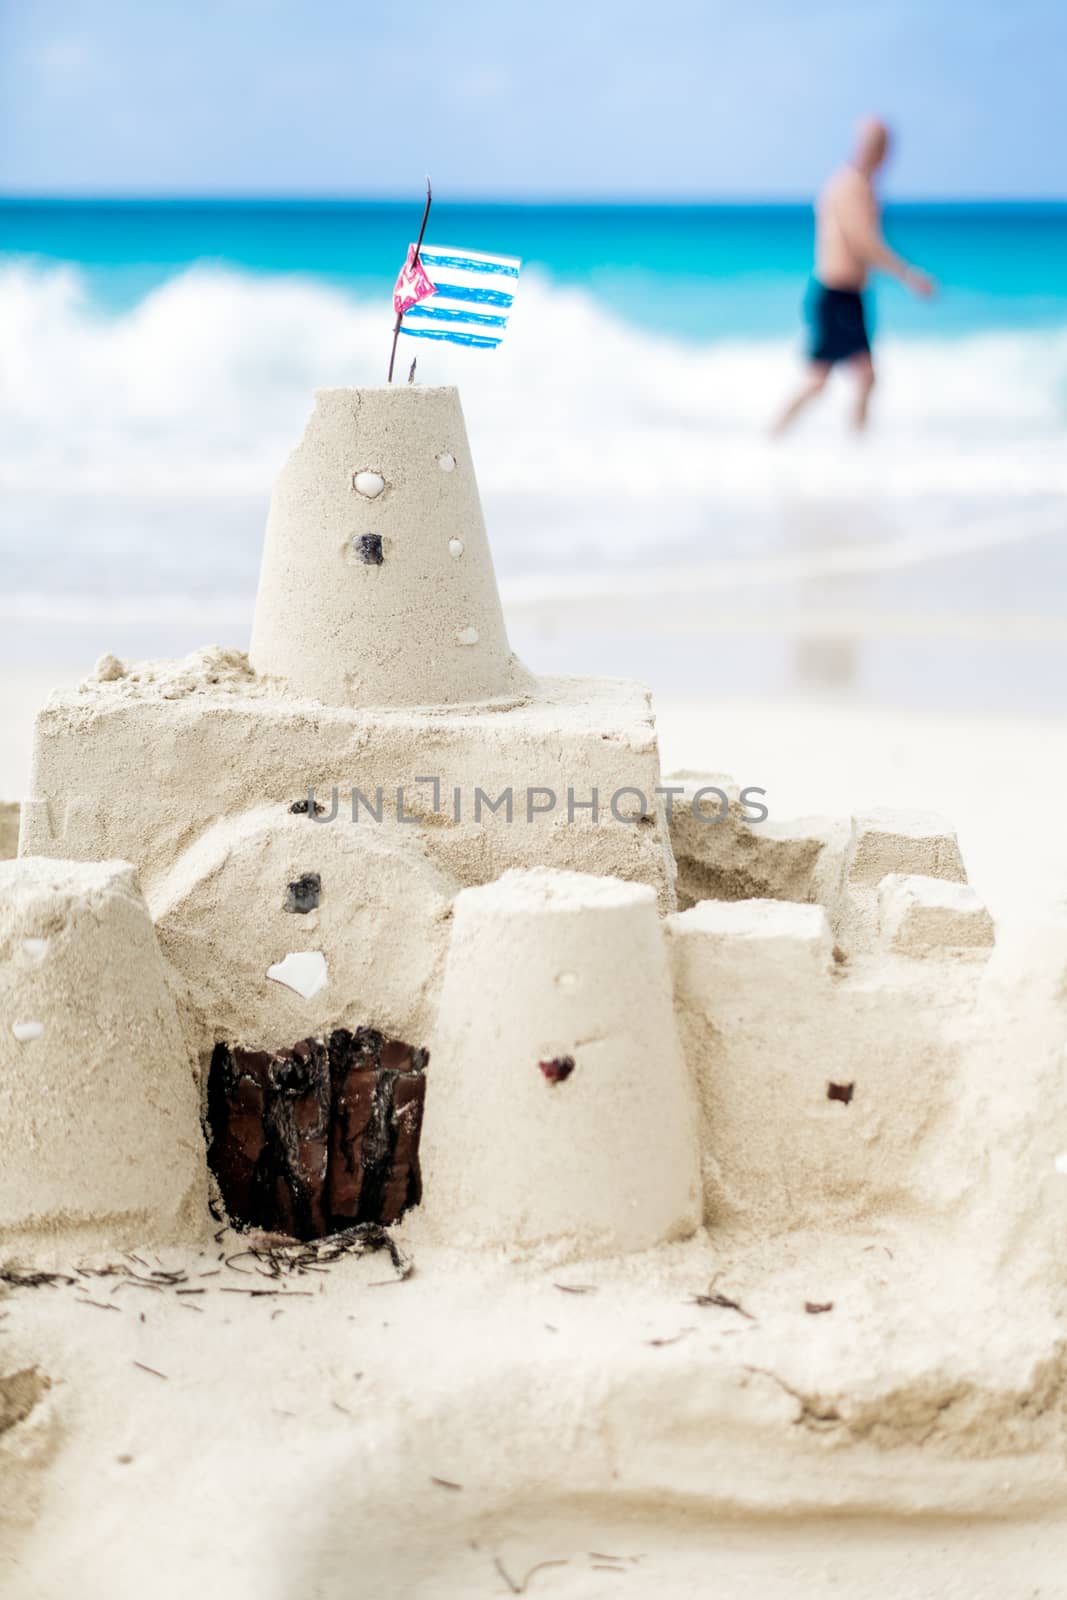 Cuban Sandcastle with the country Flag in Cuba. by aetb